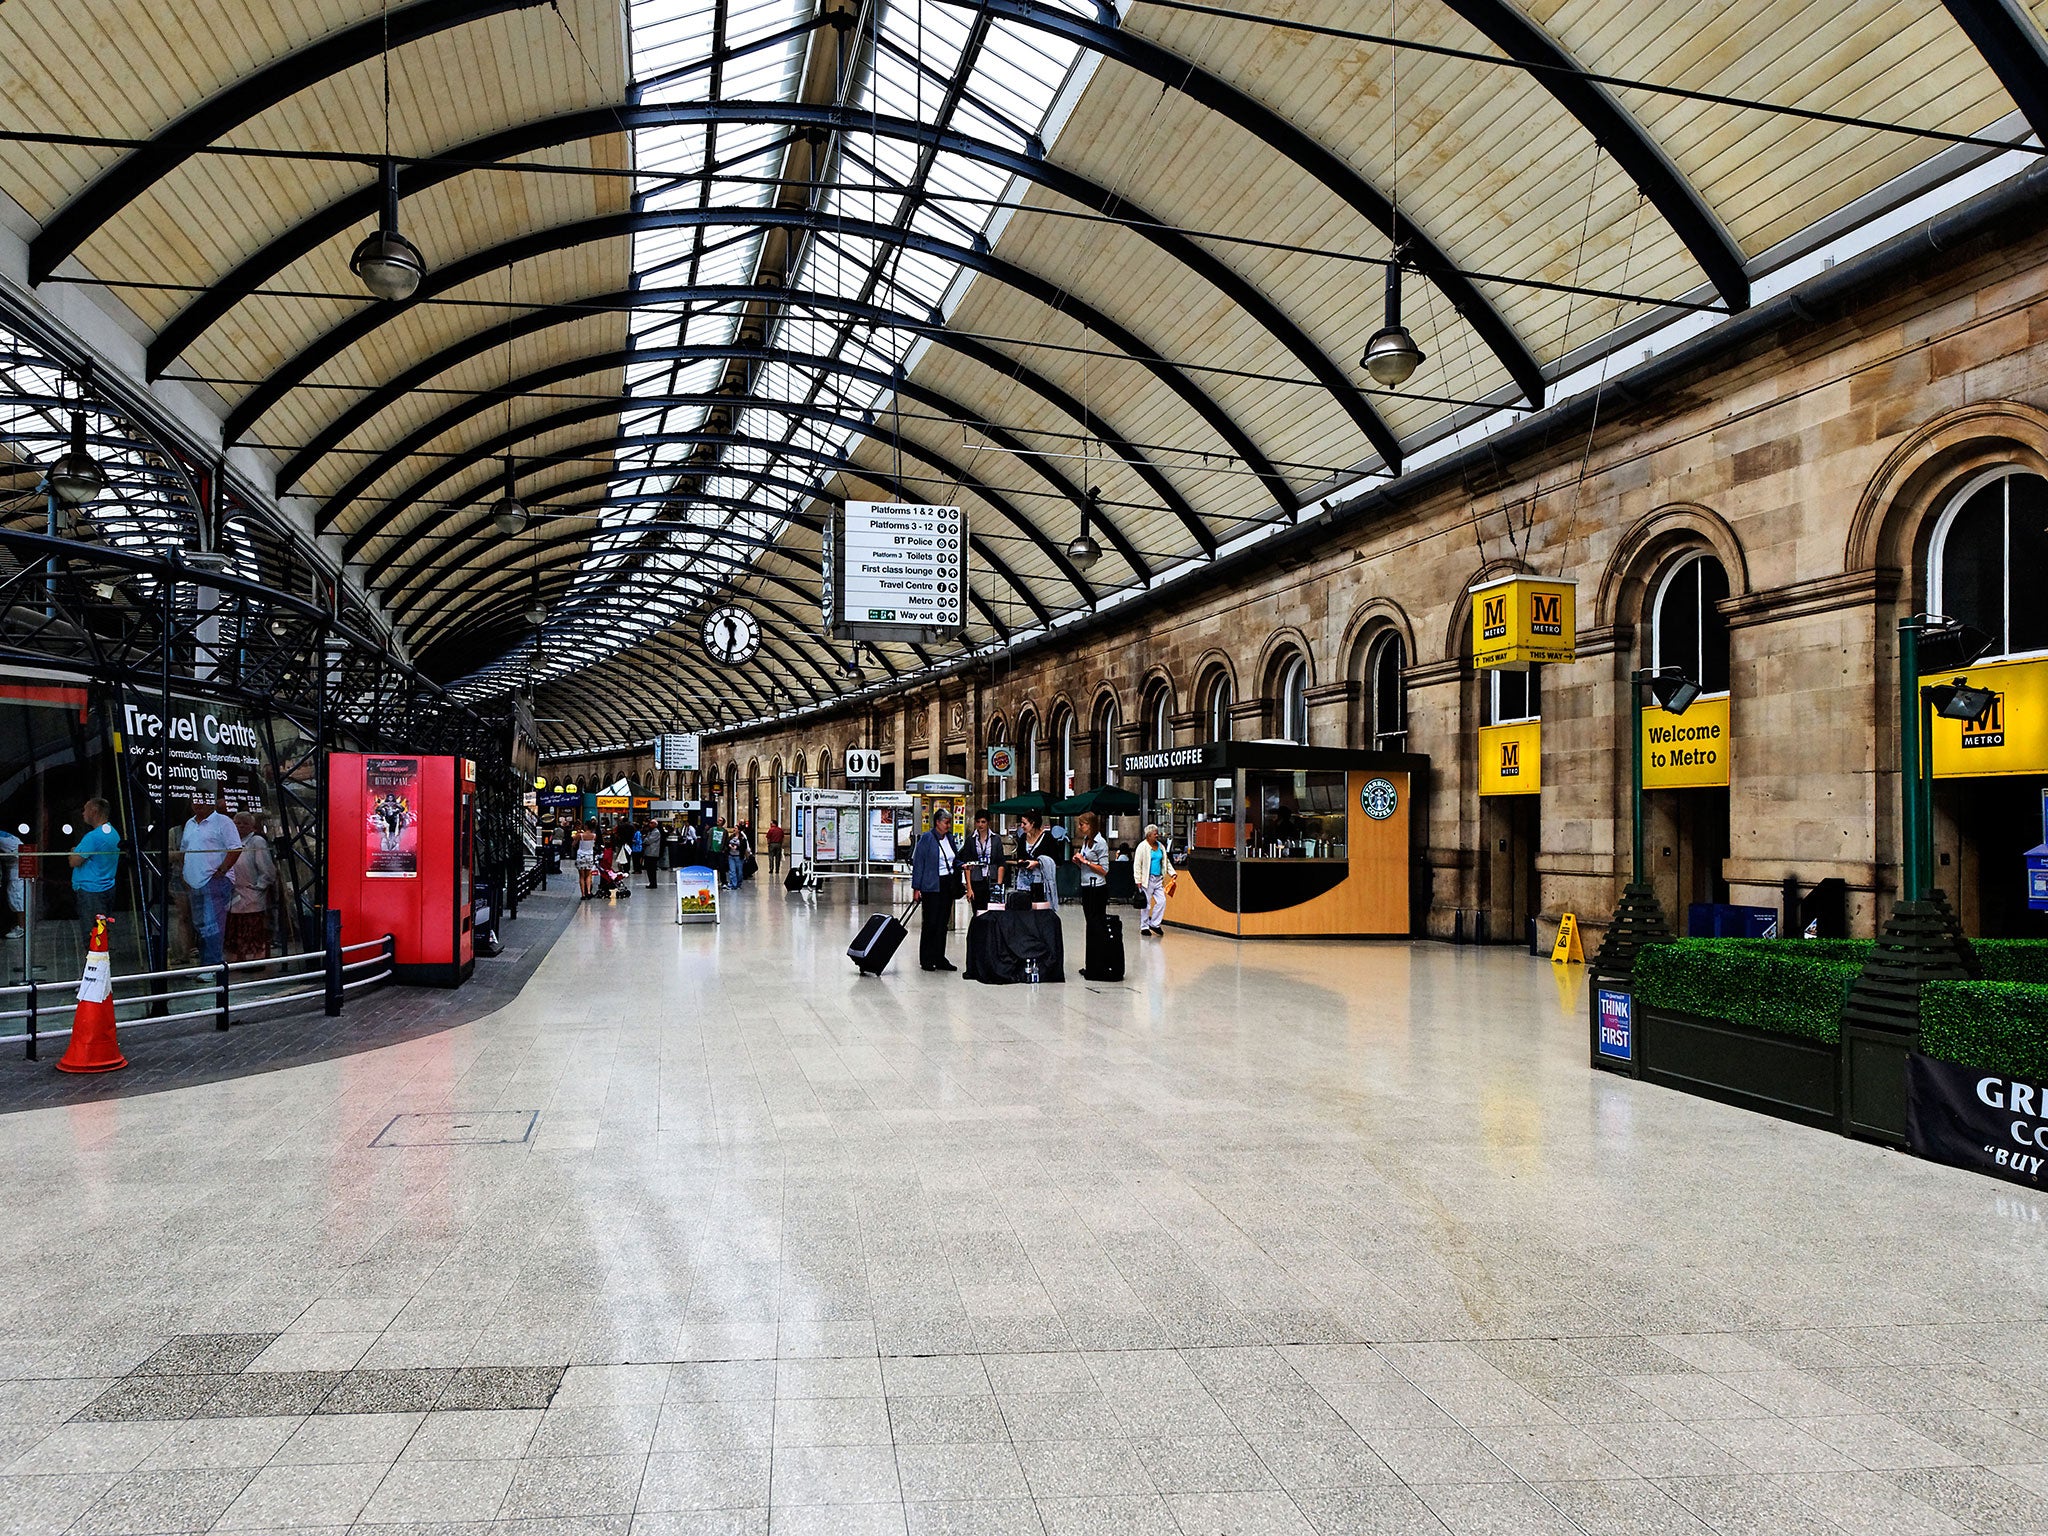 Newcastle Central was second